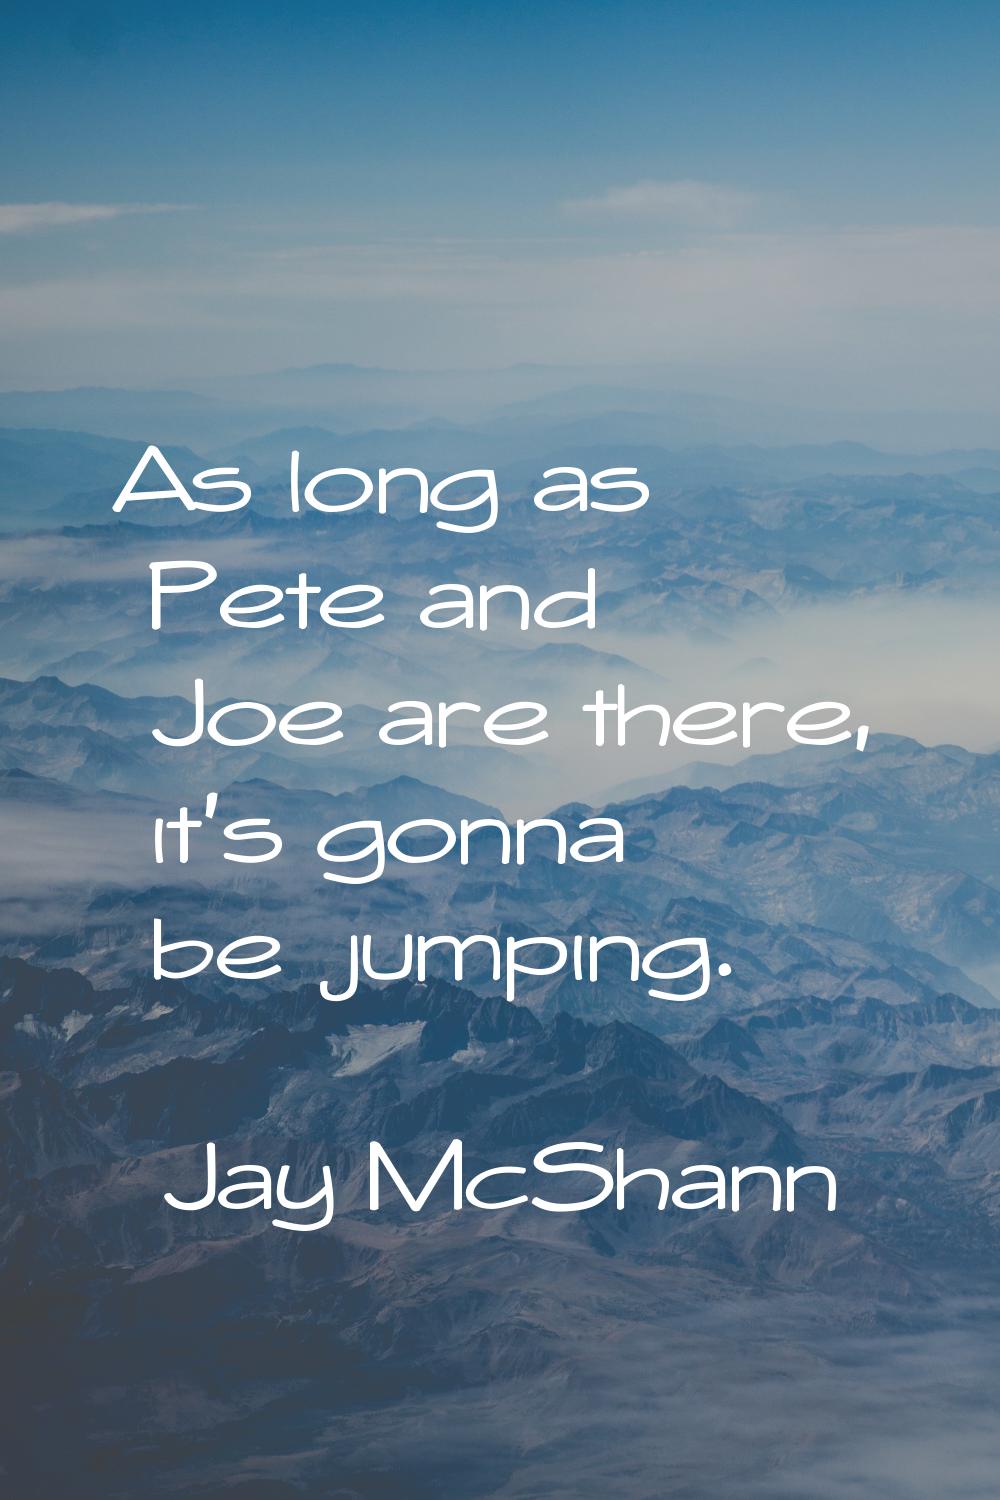 As long as Pete and Joe are there, it's gonna be jumping.